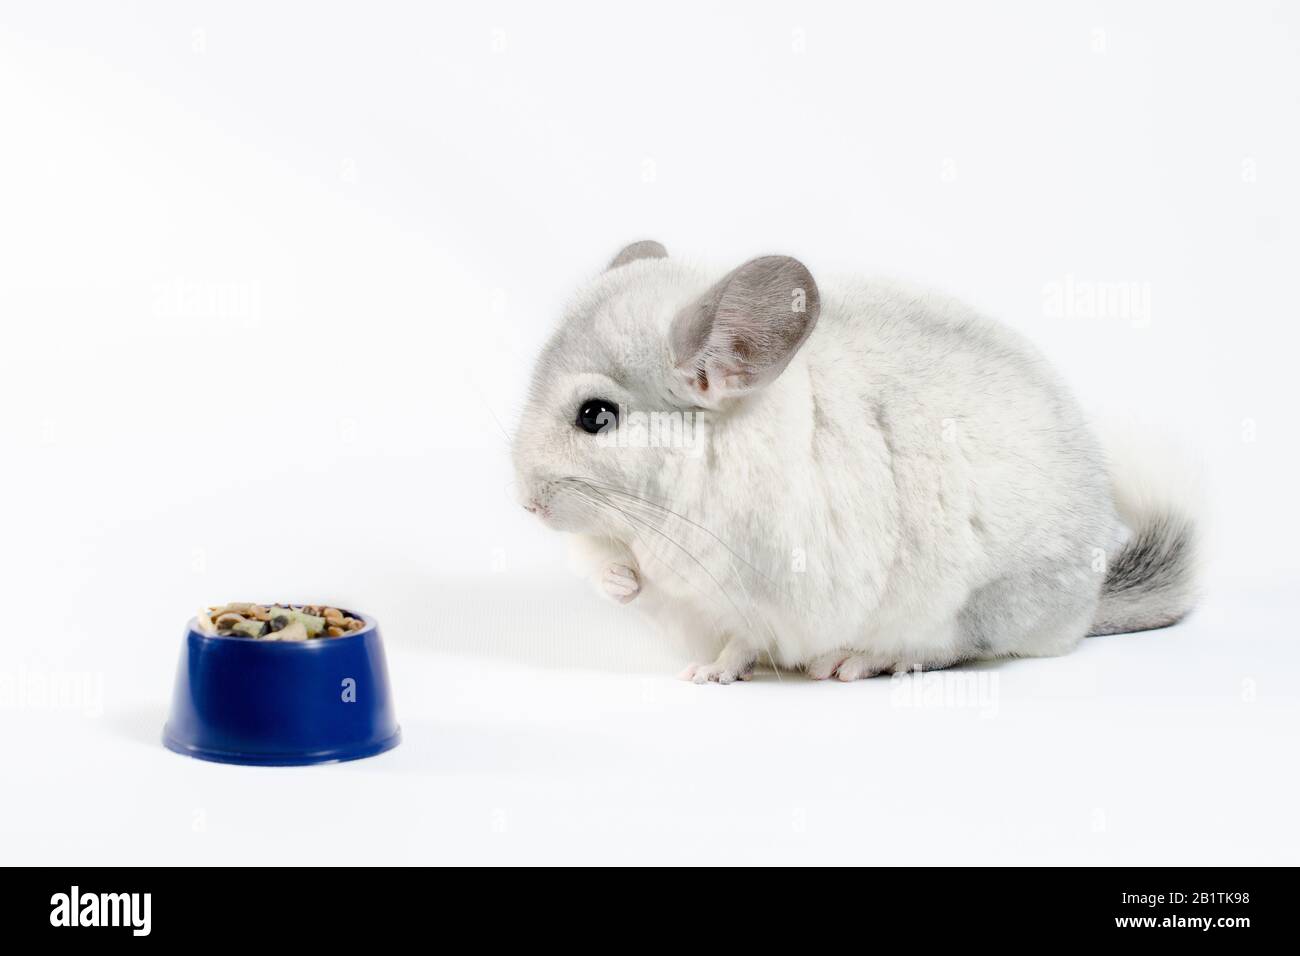 chinchilla eats its food from a blue bowl on a white background Stock Photo